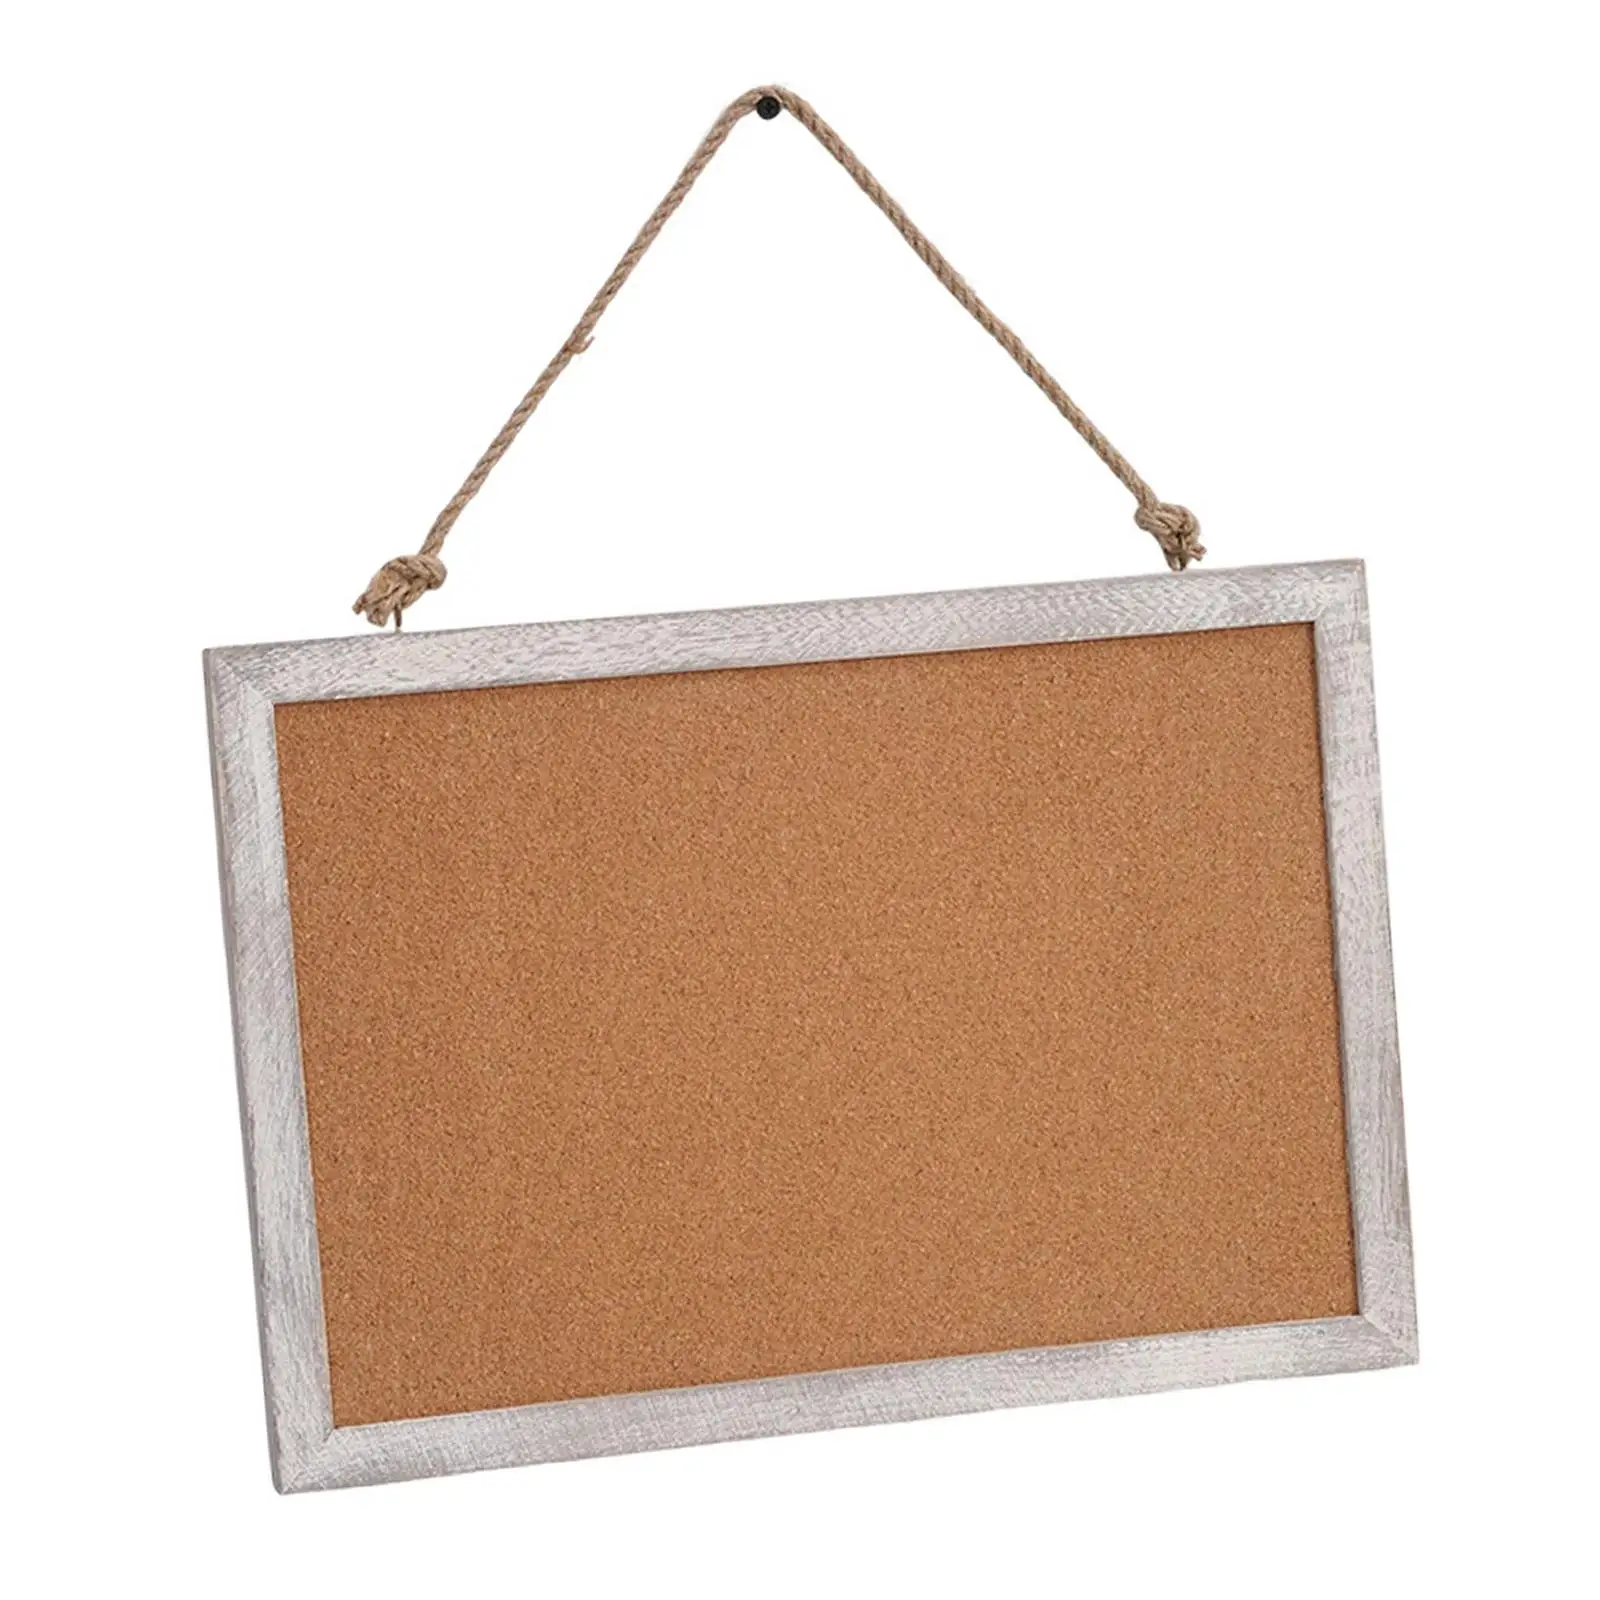 Picture Framed Display Board Multifunctional Pin Tack Board for Cubicle Dorm